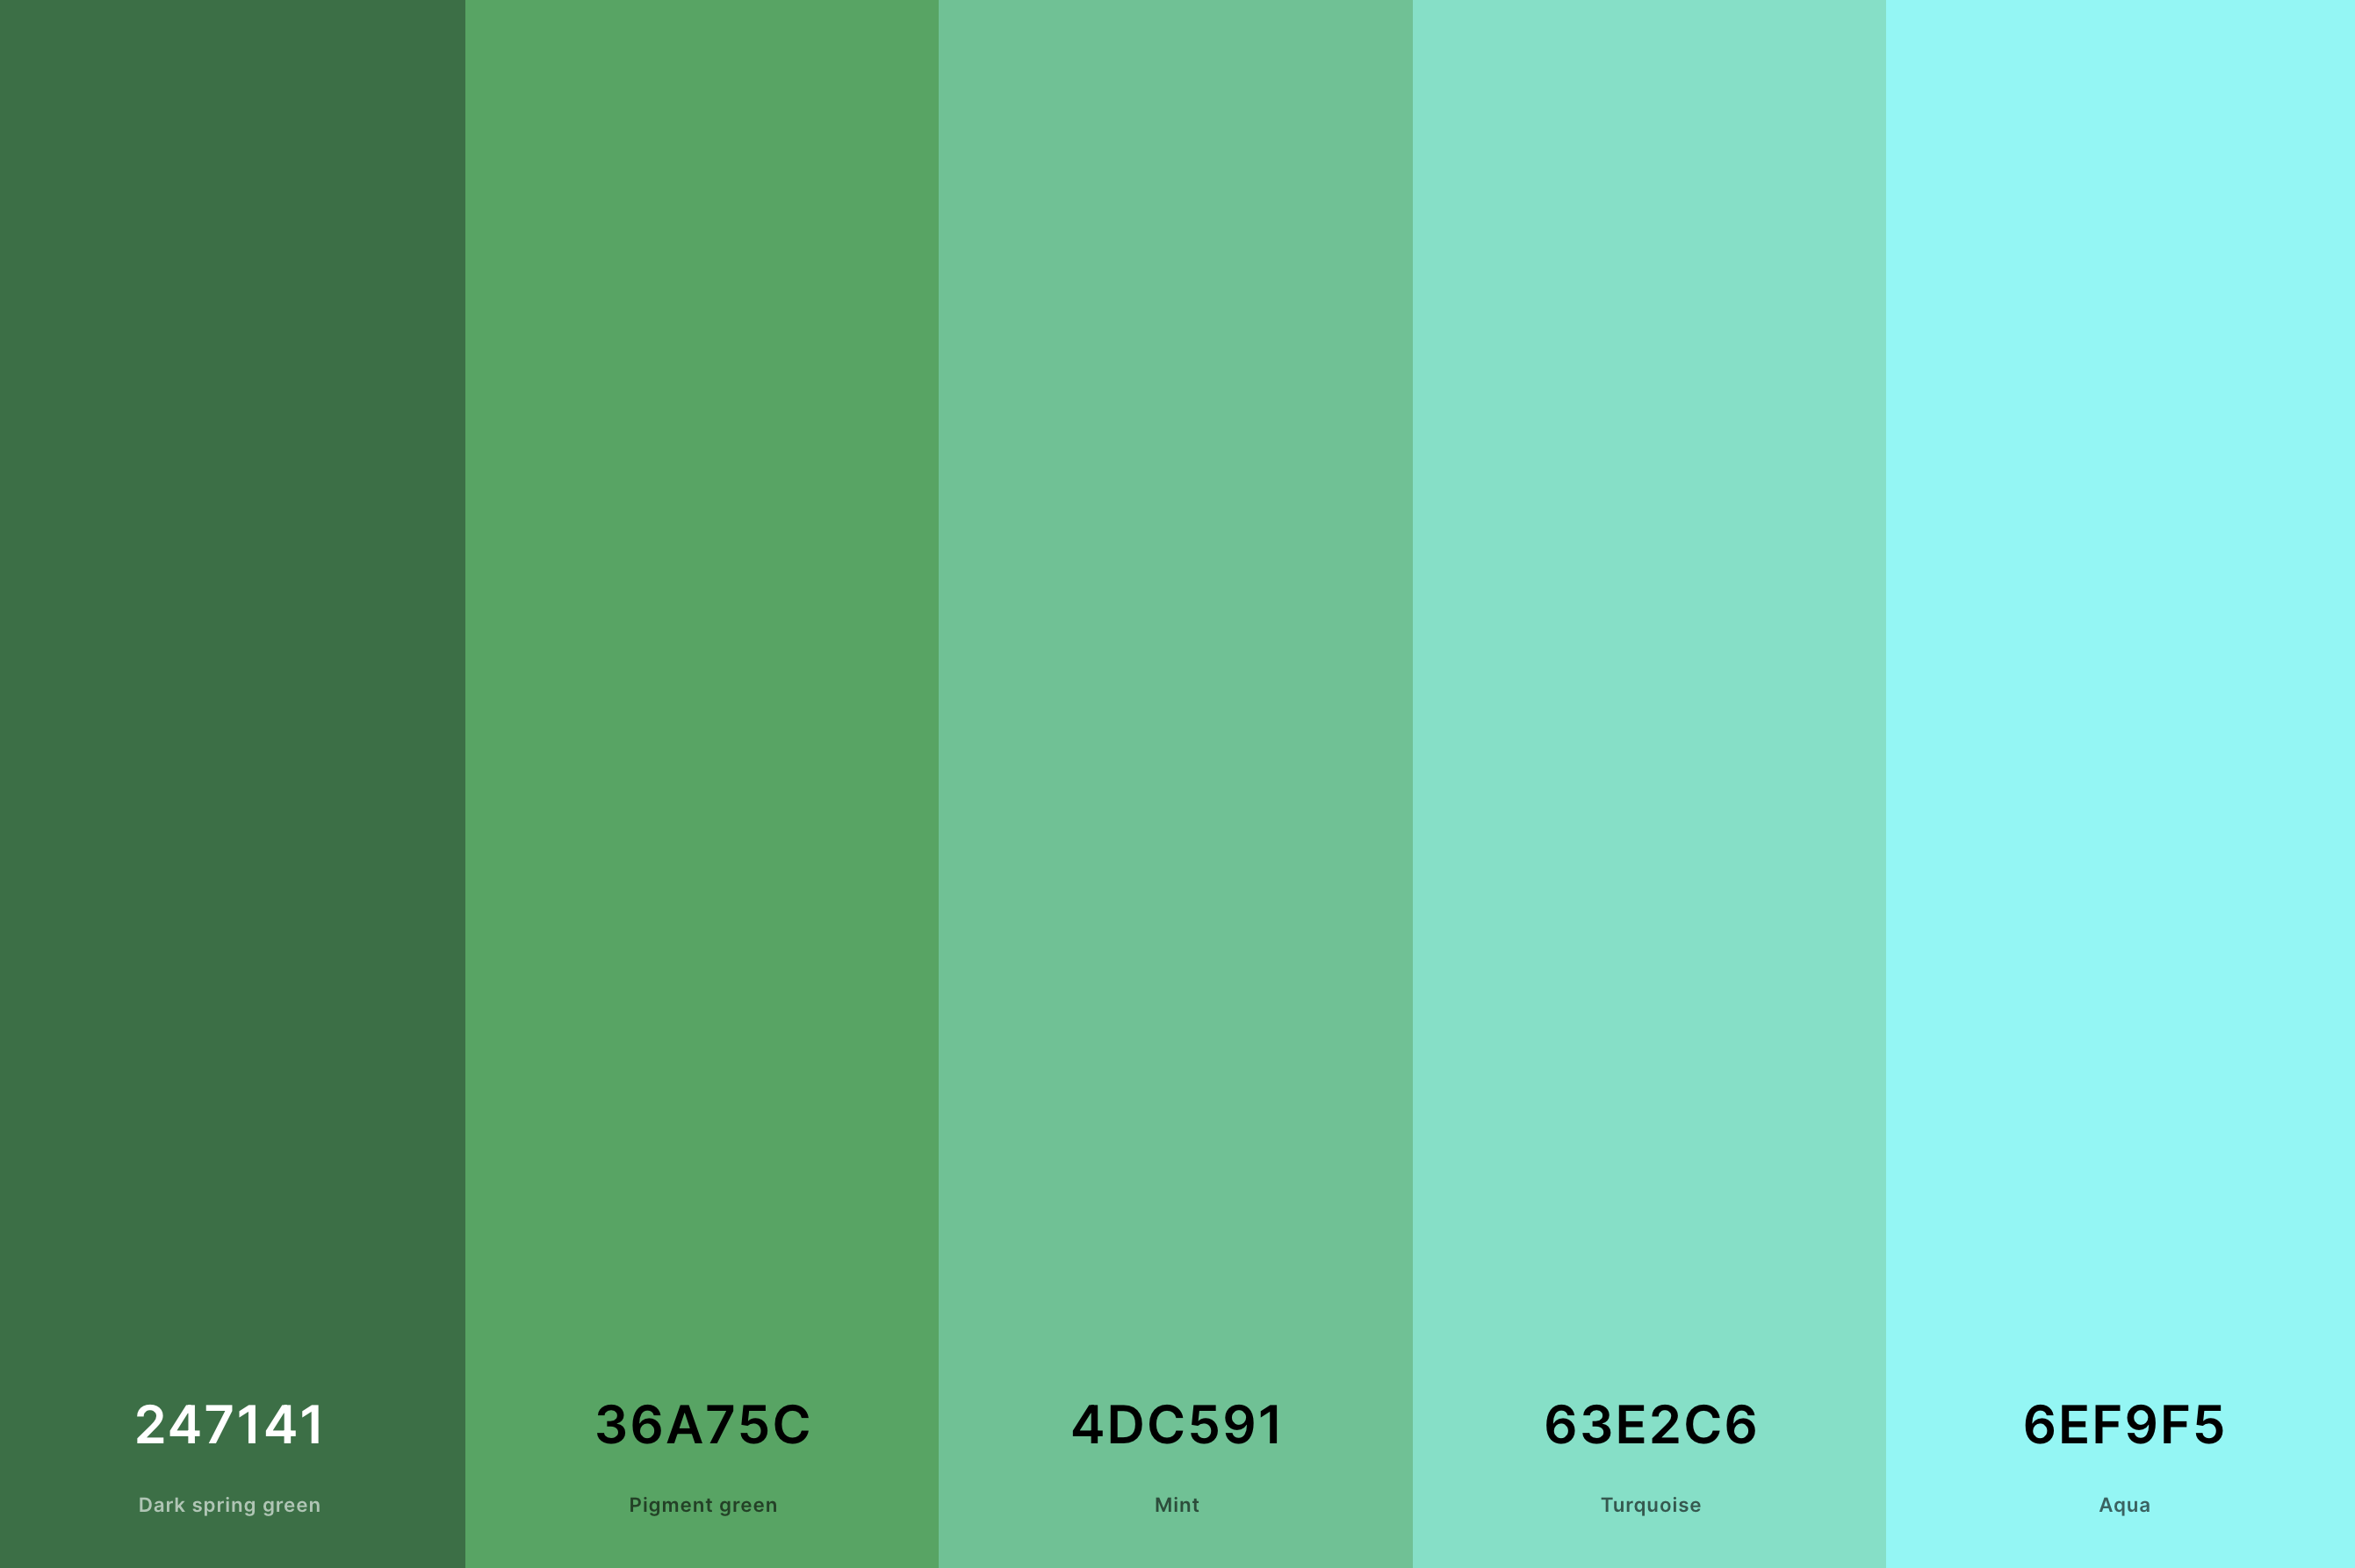 11. Green And Turquoise Color Palette Color Palette with Dark Spring Green (Hex #247141) + Pigment Green (Hex #36A75C) + Mint (Hex #4DC591) + Turquoise (Hex #63E2C6) + Aqua (Hex #6EF9F5) Color Palette with Hex Codes